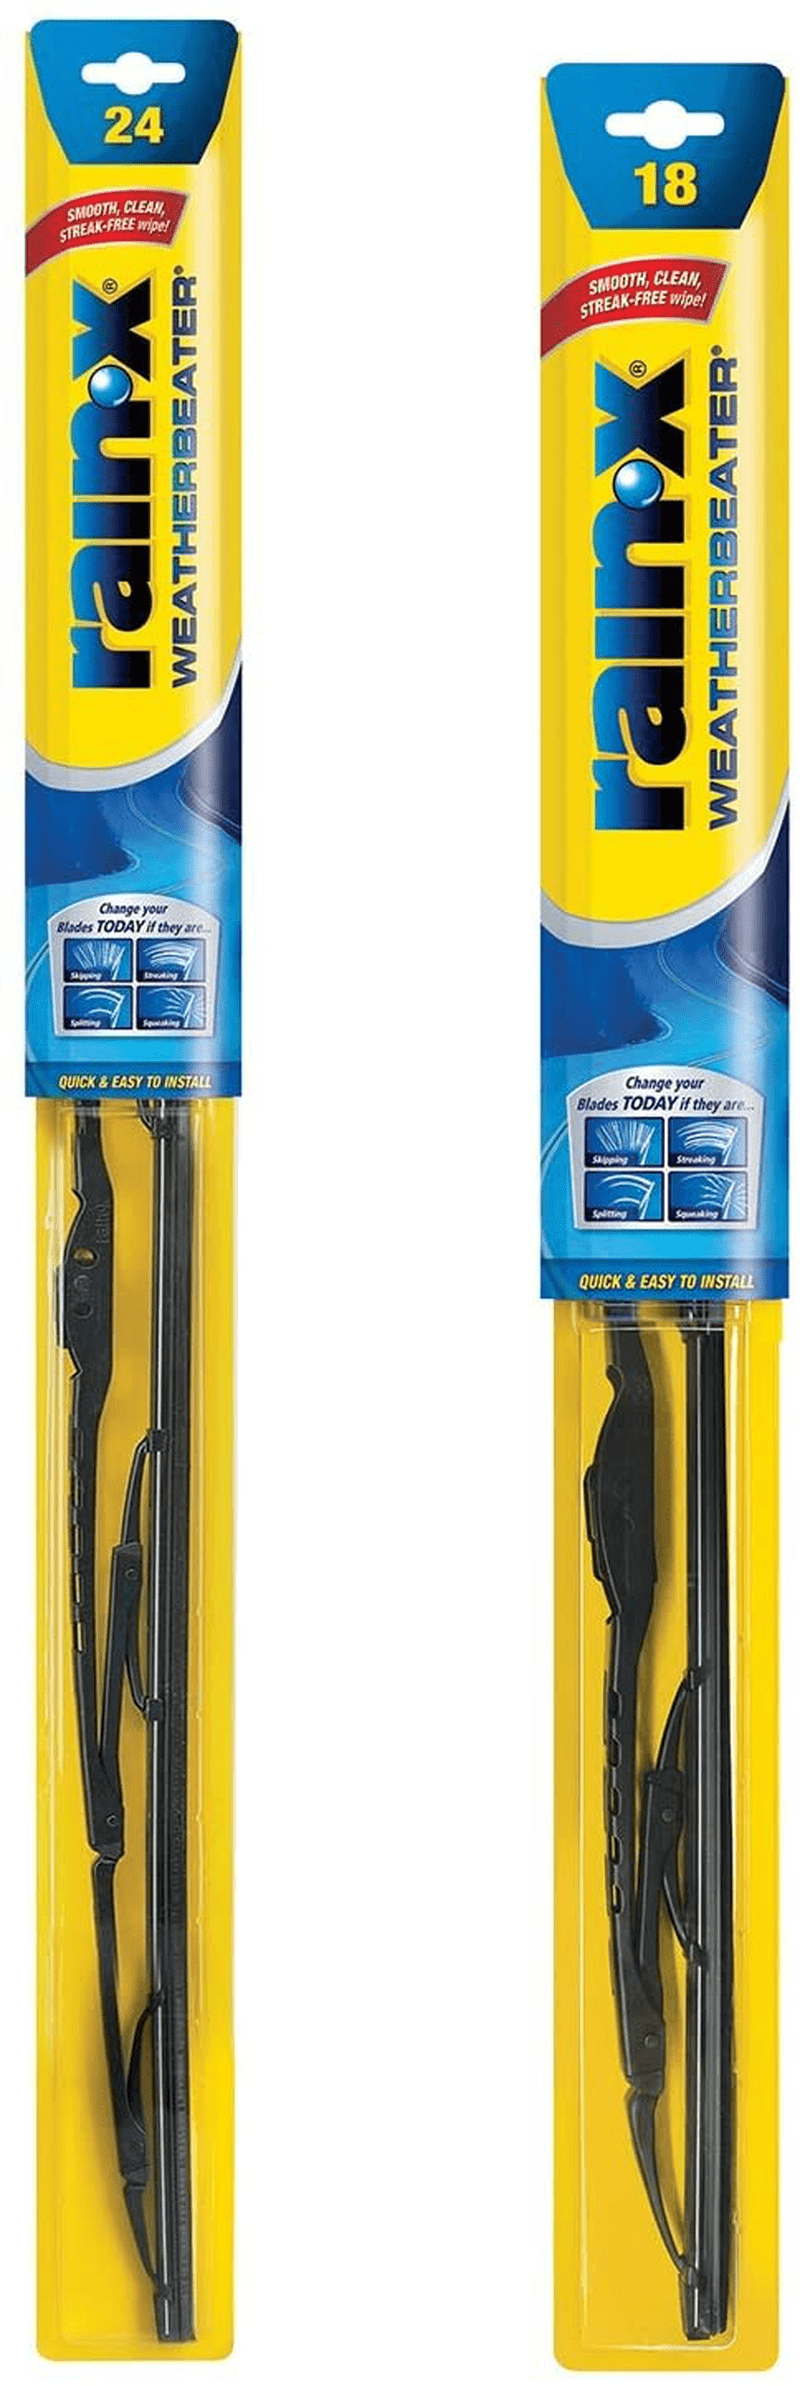 Rain-X RX30218 Weatherbeater Wiper Blade - 18-Inches - (Pack of 1) Vehicles & Parts > Vehicle Parts & Accessories > Motor Vehicle Parts Rain-X 2-pack 24 /18 in combo 